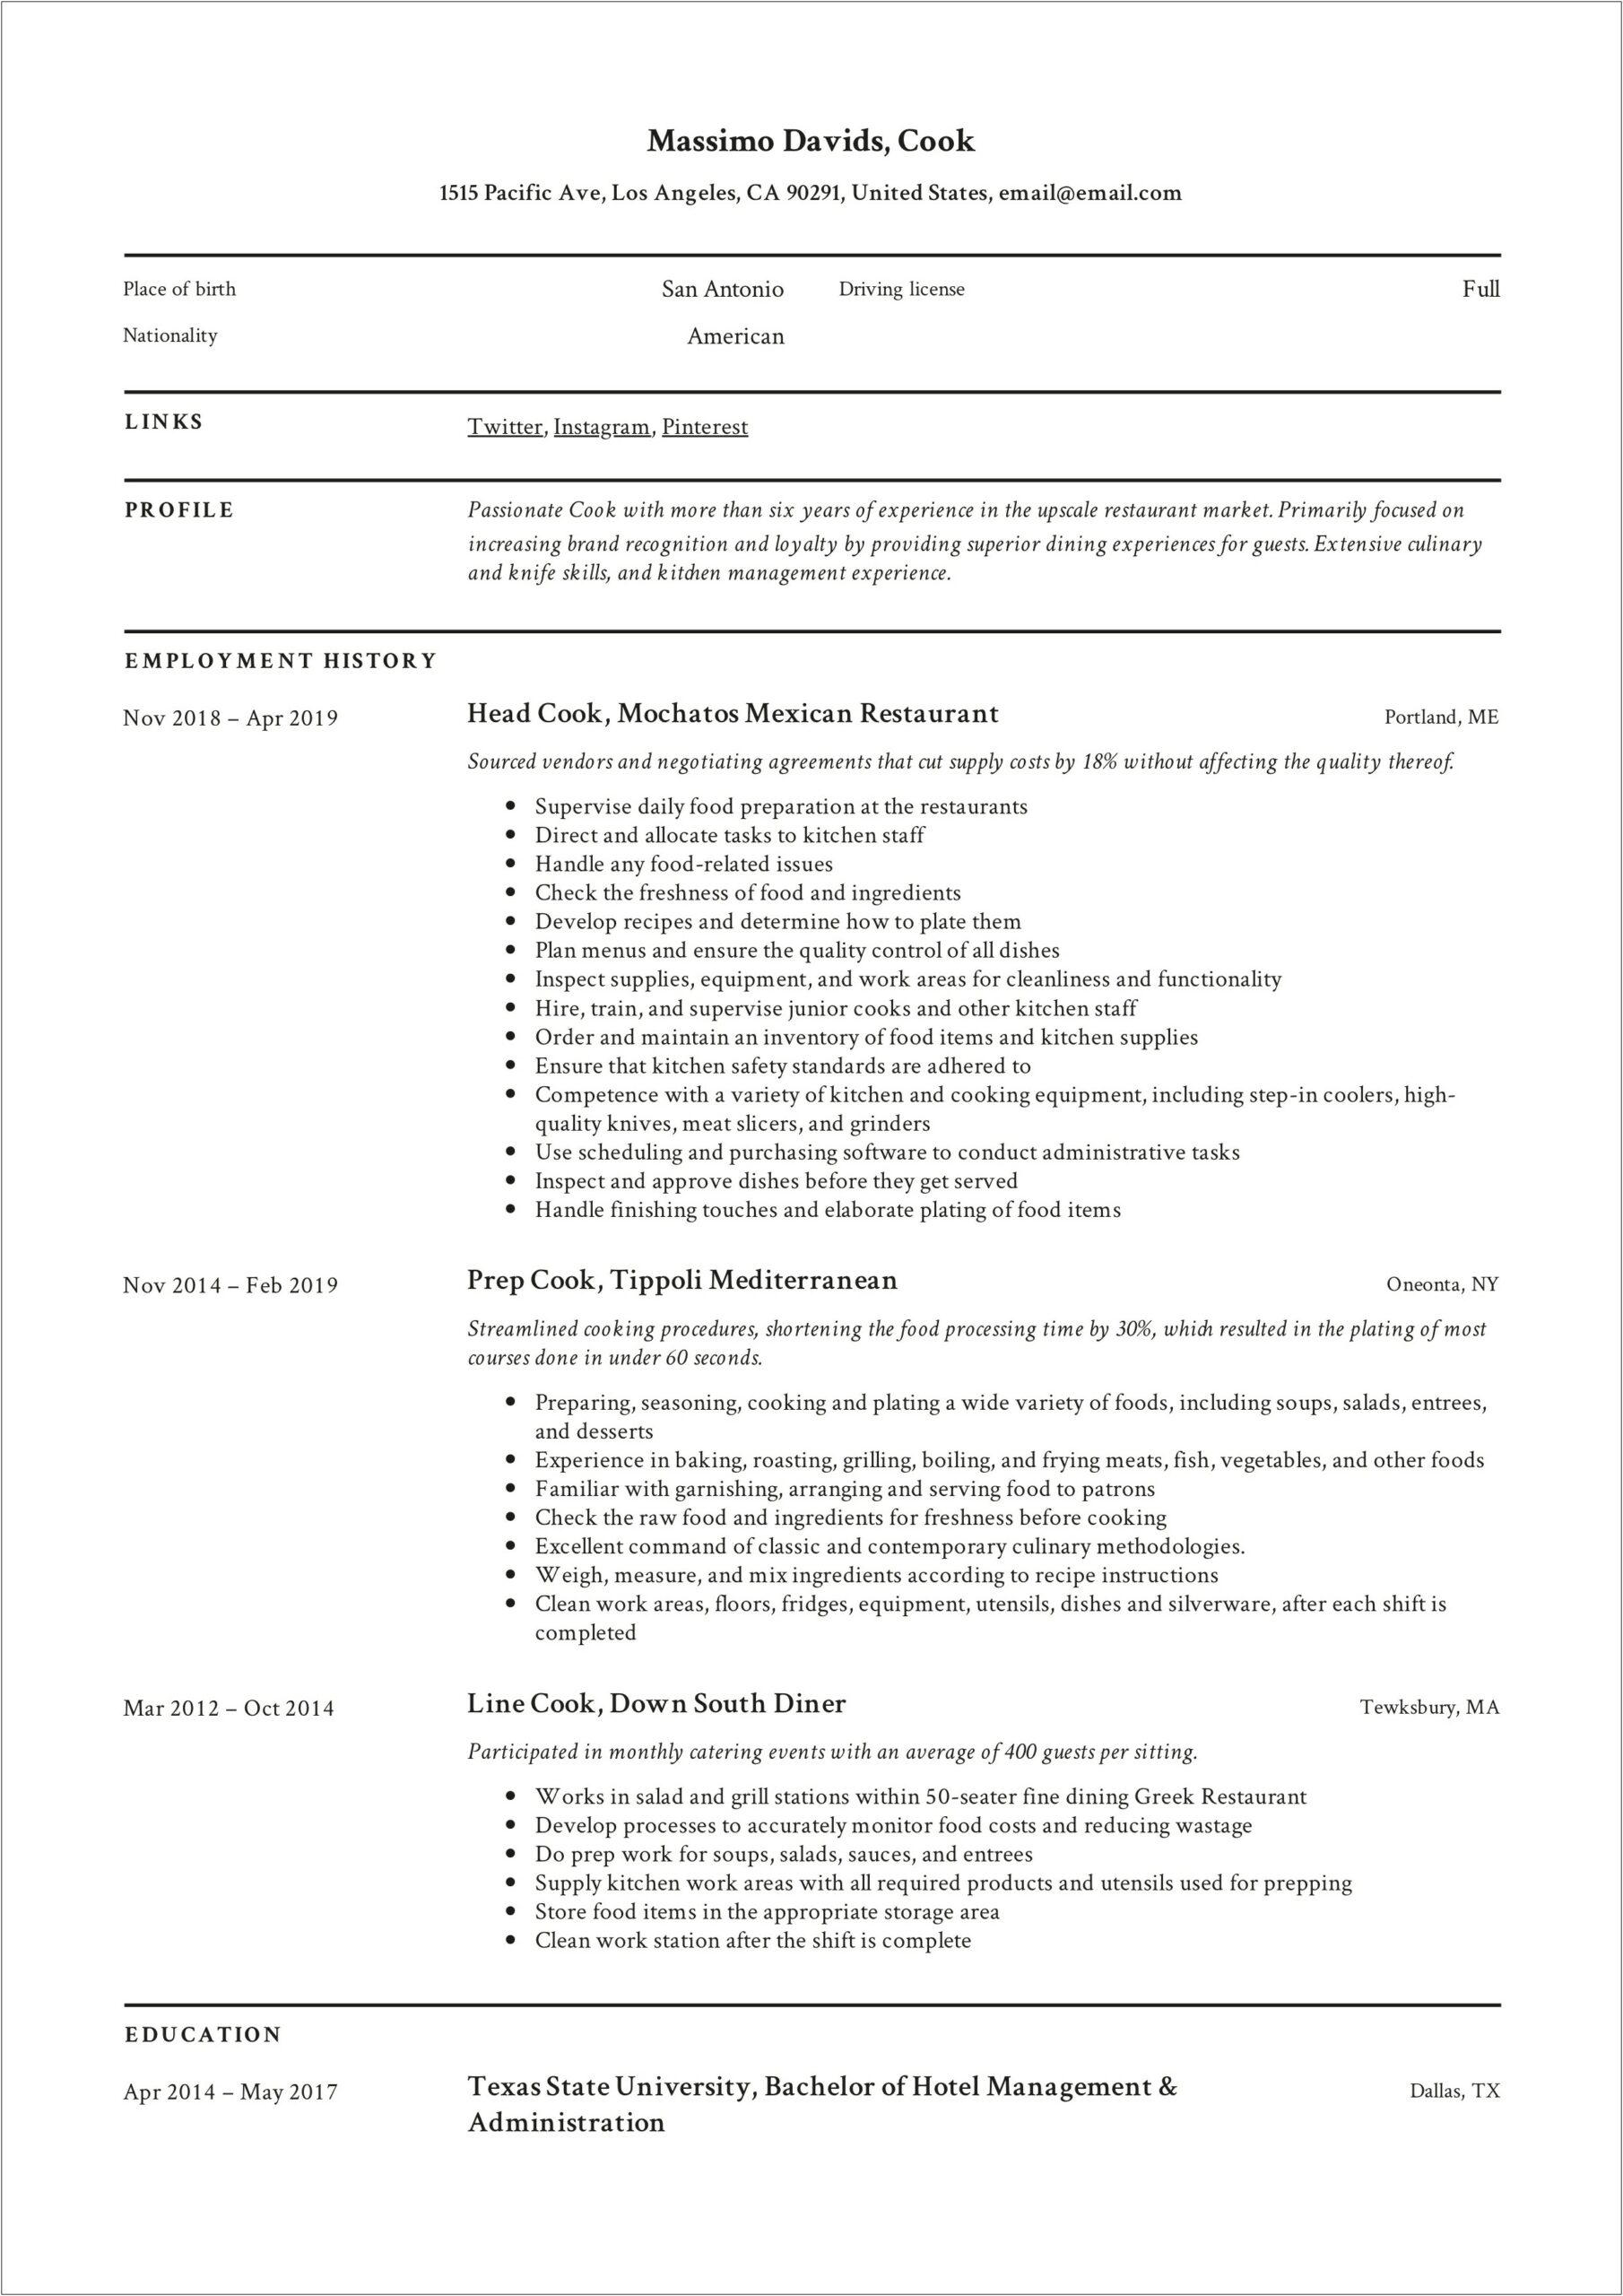 Chef Japanese Cuisine Professional Summary For Resume